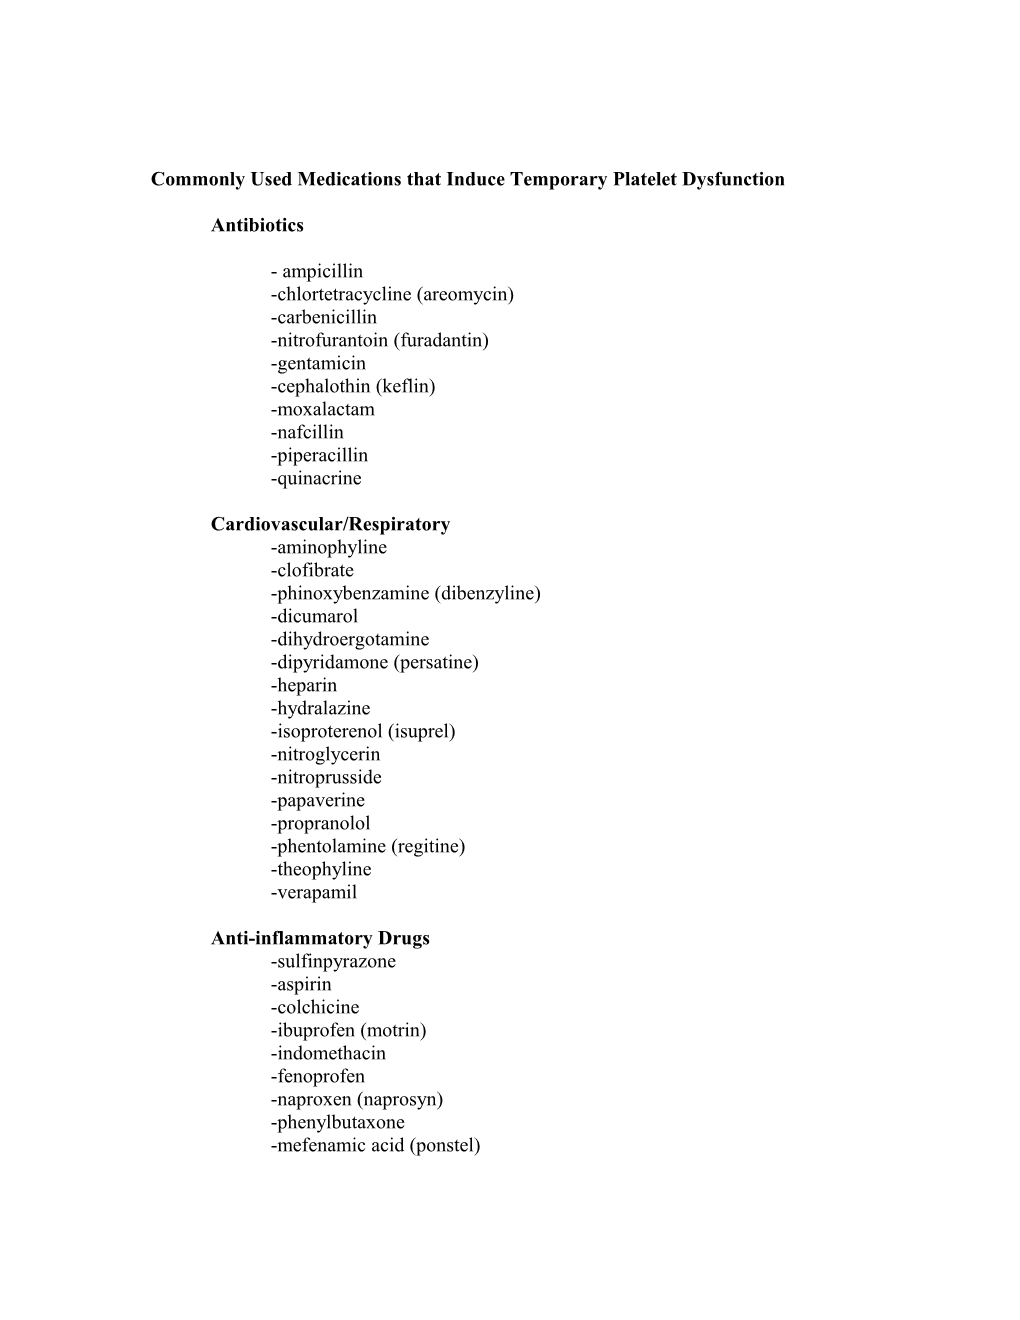 Commonly Used Medications That Induce Temporary Platelet Dysfunction